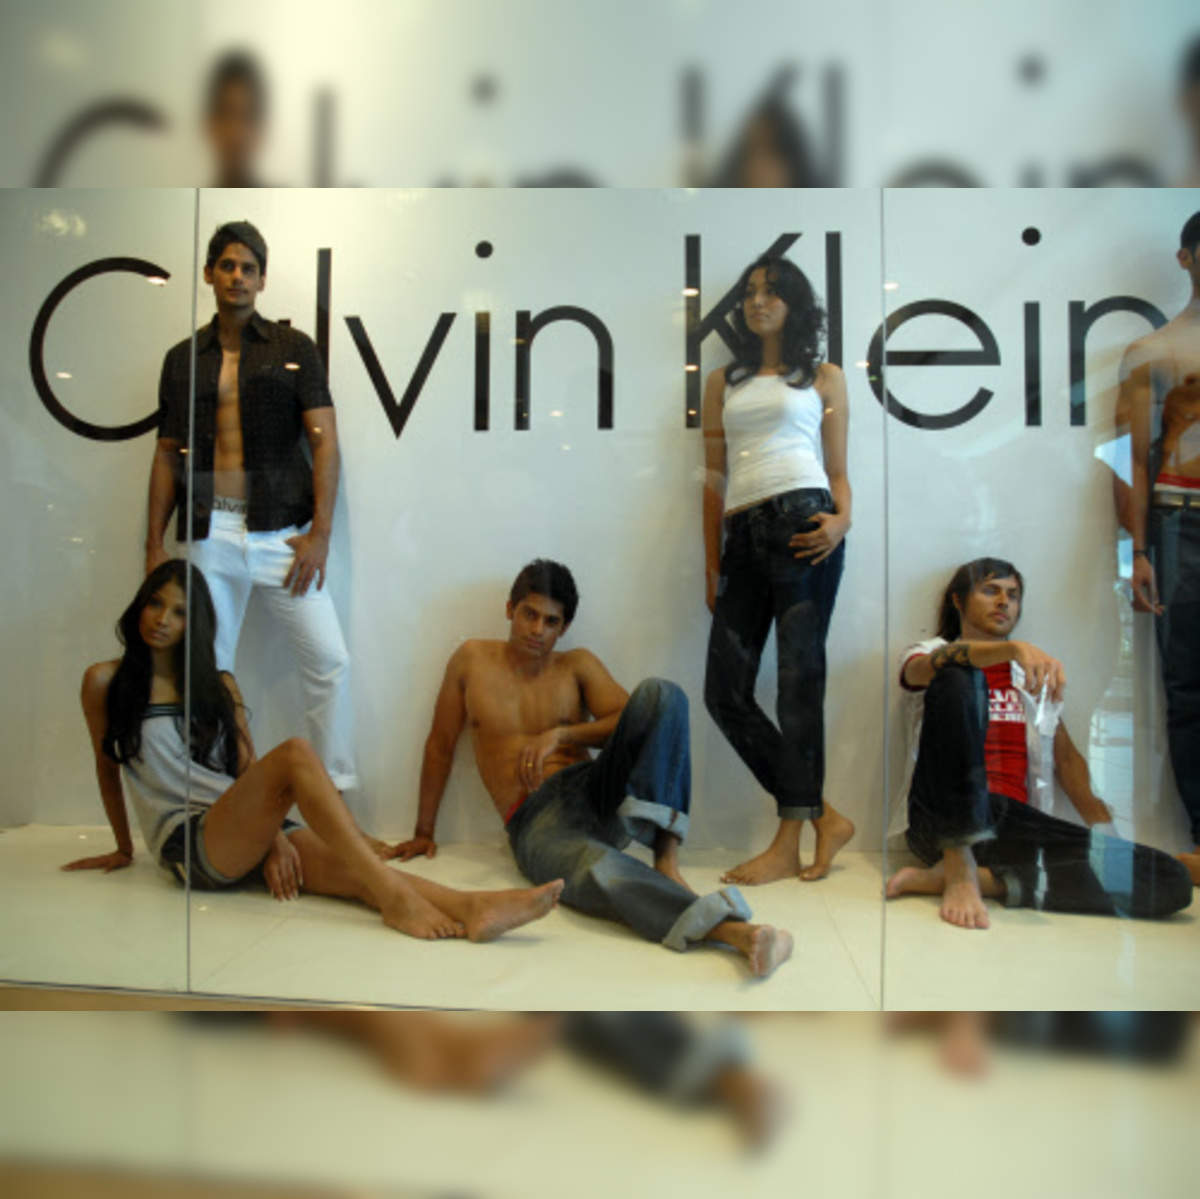 Arvind to market Calvin Klein brand products in India - The